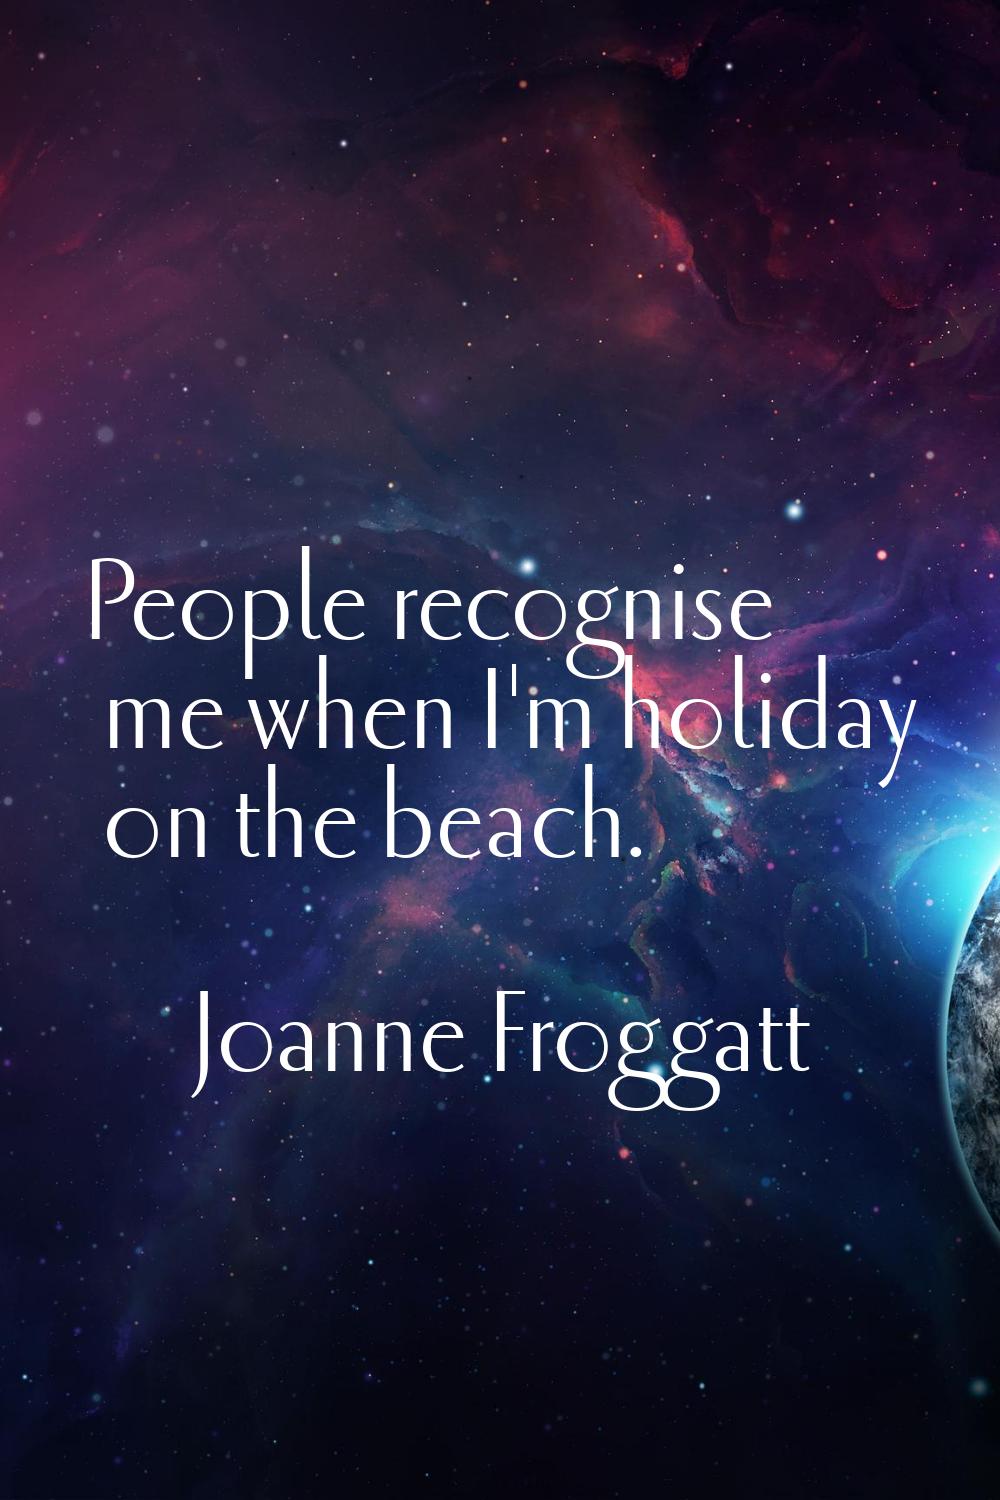 People recognise me when I'm holiday on the beach.